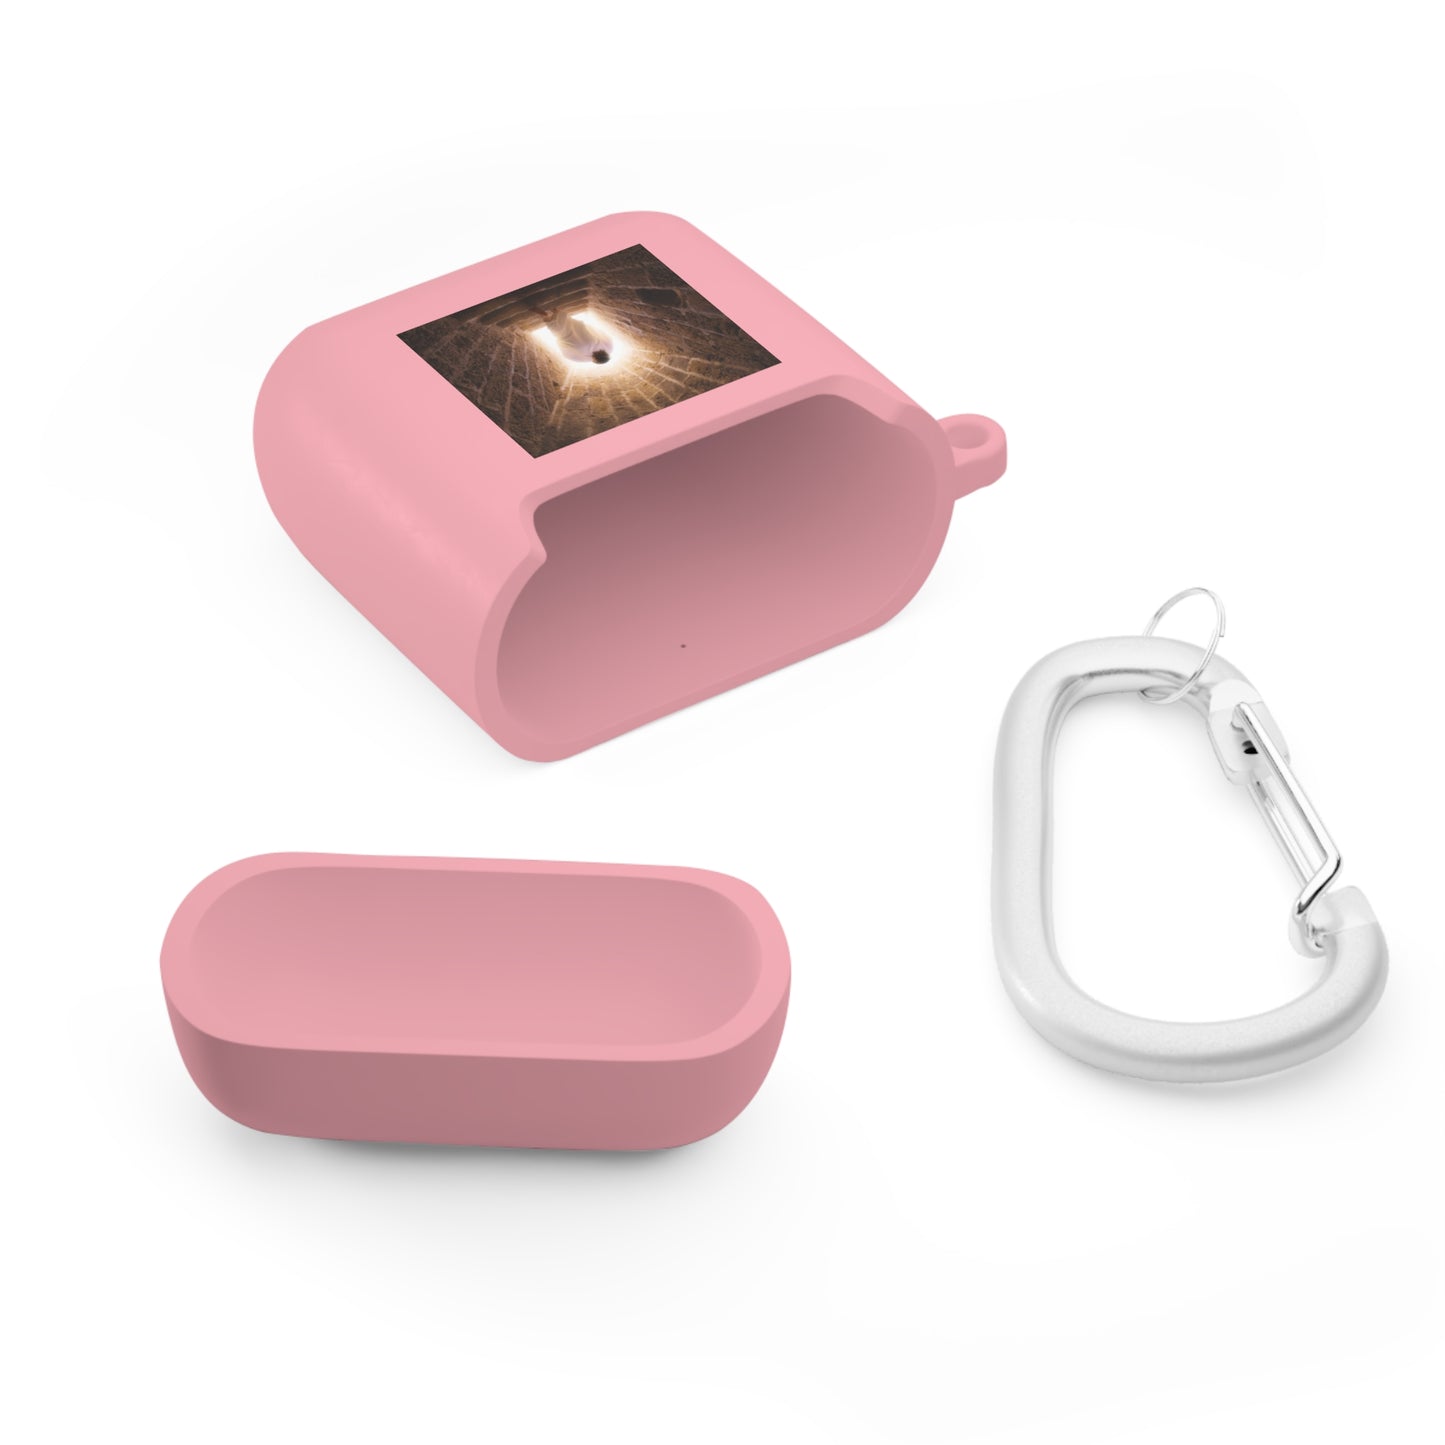 AirPods and AirPods Pro Case Cove WITH JESUS SAYING "I'LL BE BACK, AND BACK SIDE OF AIR PODS JESUS COMING OUT OF THE TOMB